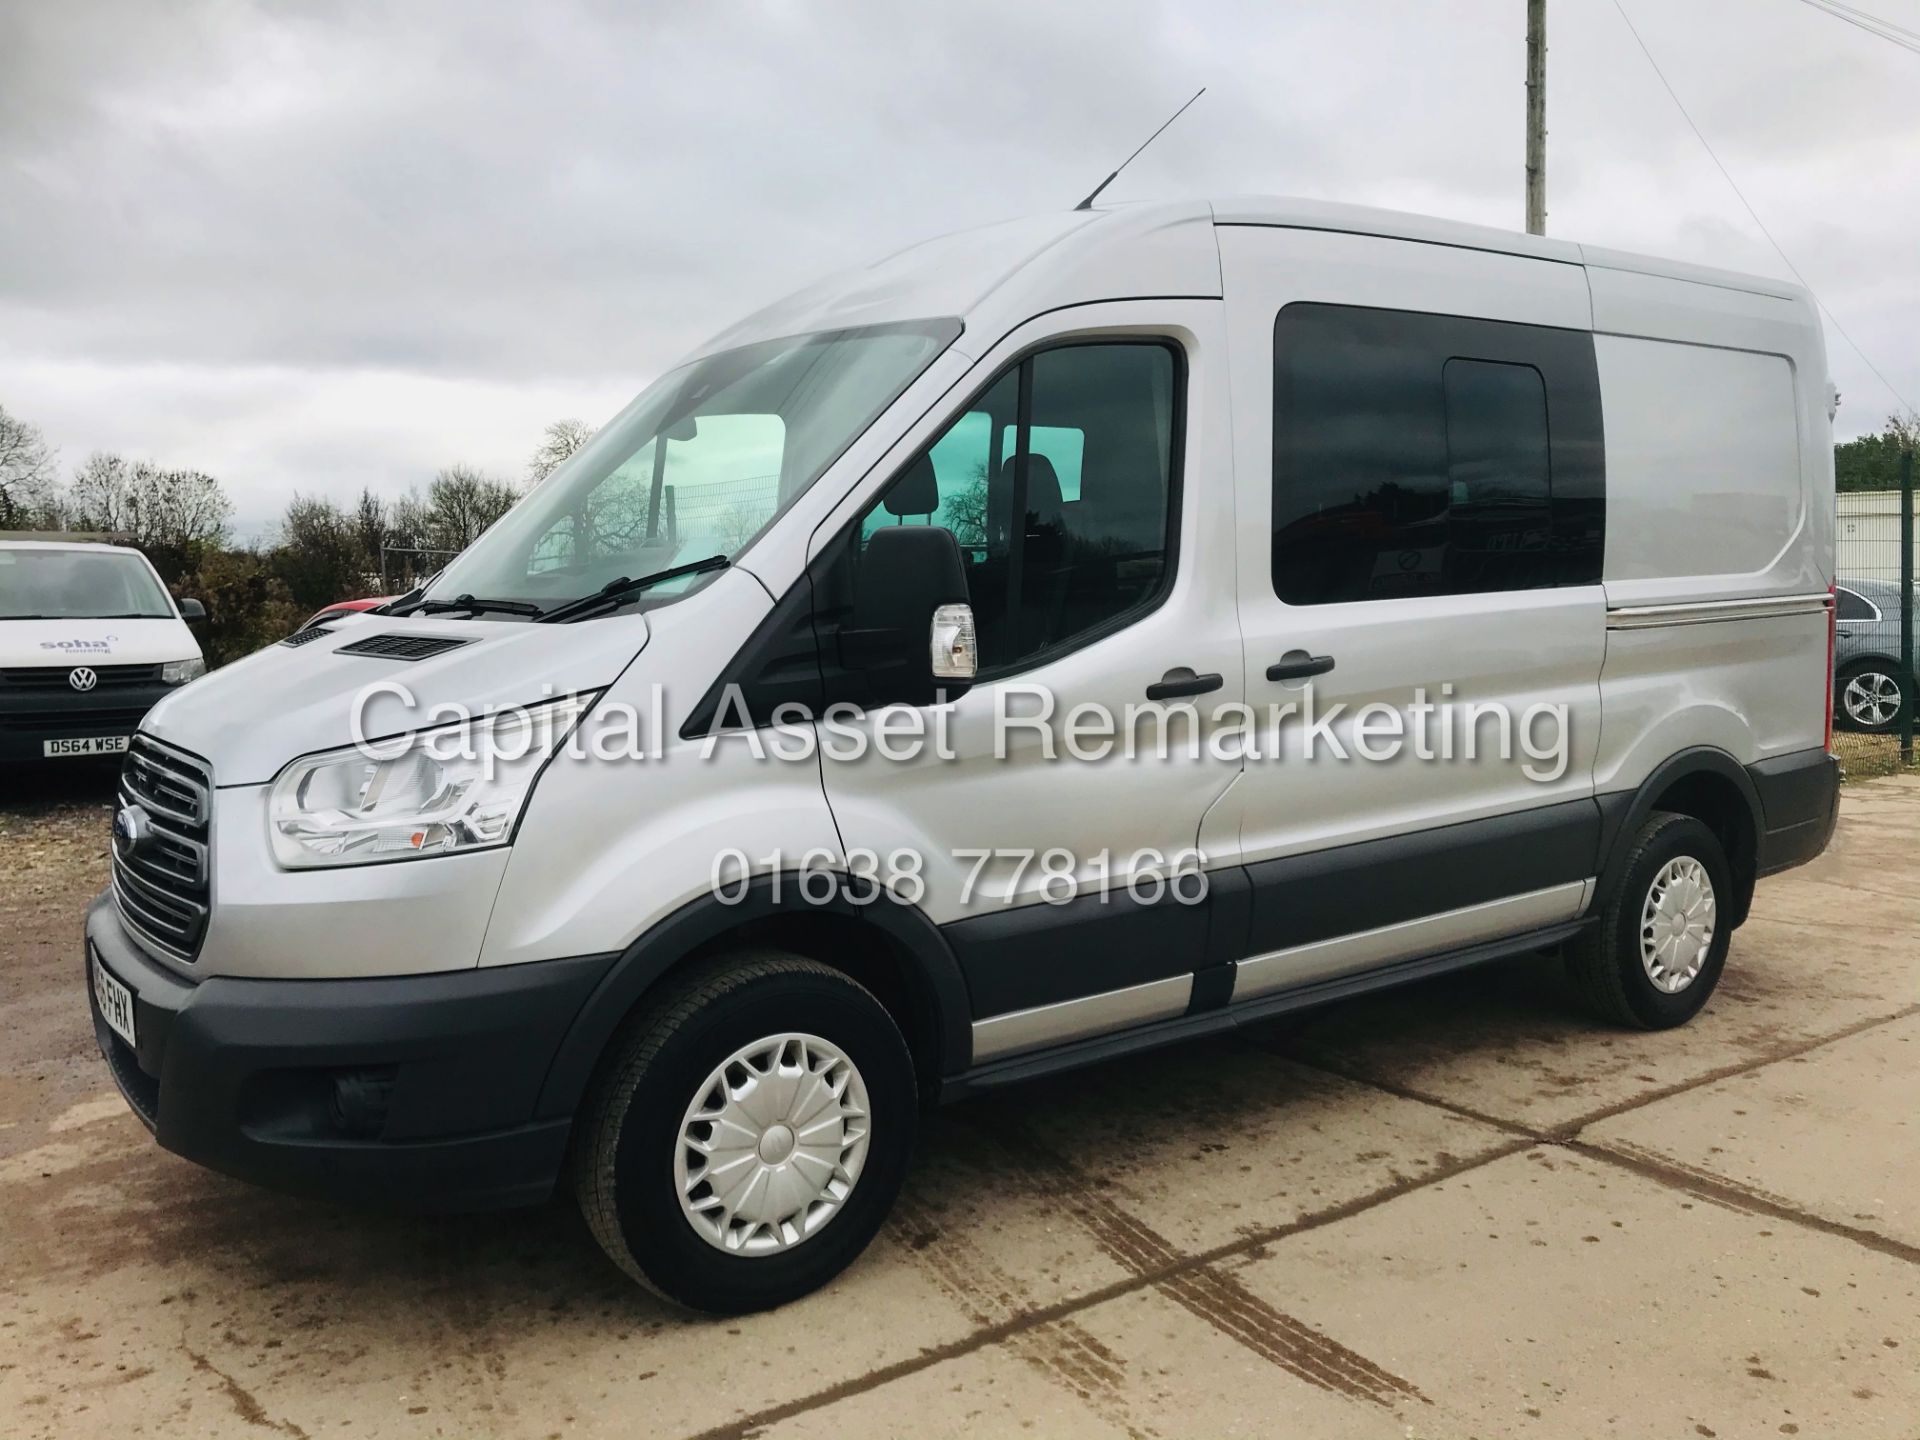 ON SALE FORD TRANSIT 2.2TDCI"TREND"L2H2 -1 OWNER FSH (2017 MODEL) AIR CON*EURO 6* 7 SEATER KOMBI VAN - Image 2 of 20